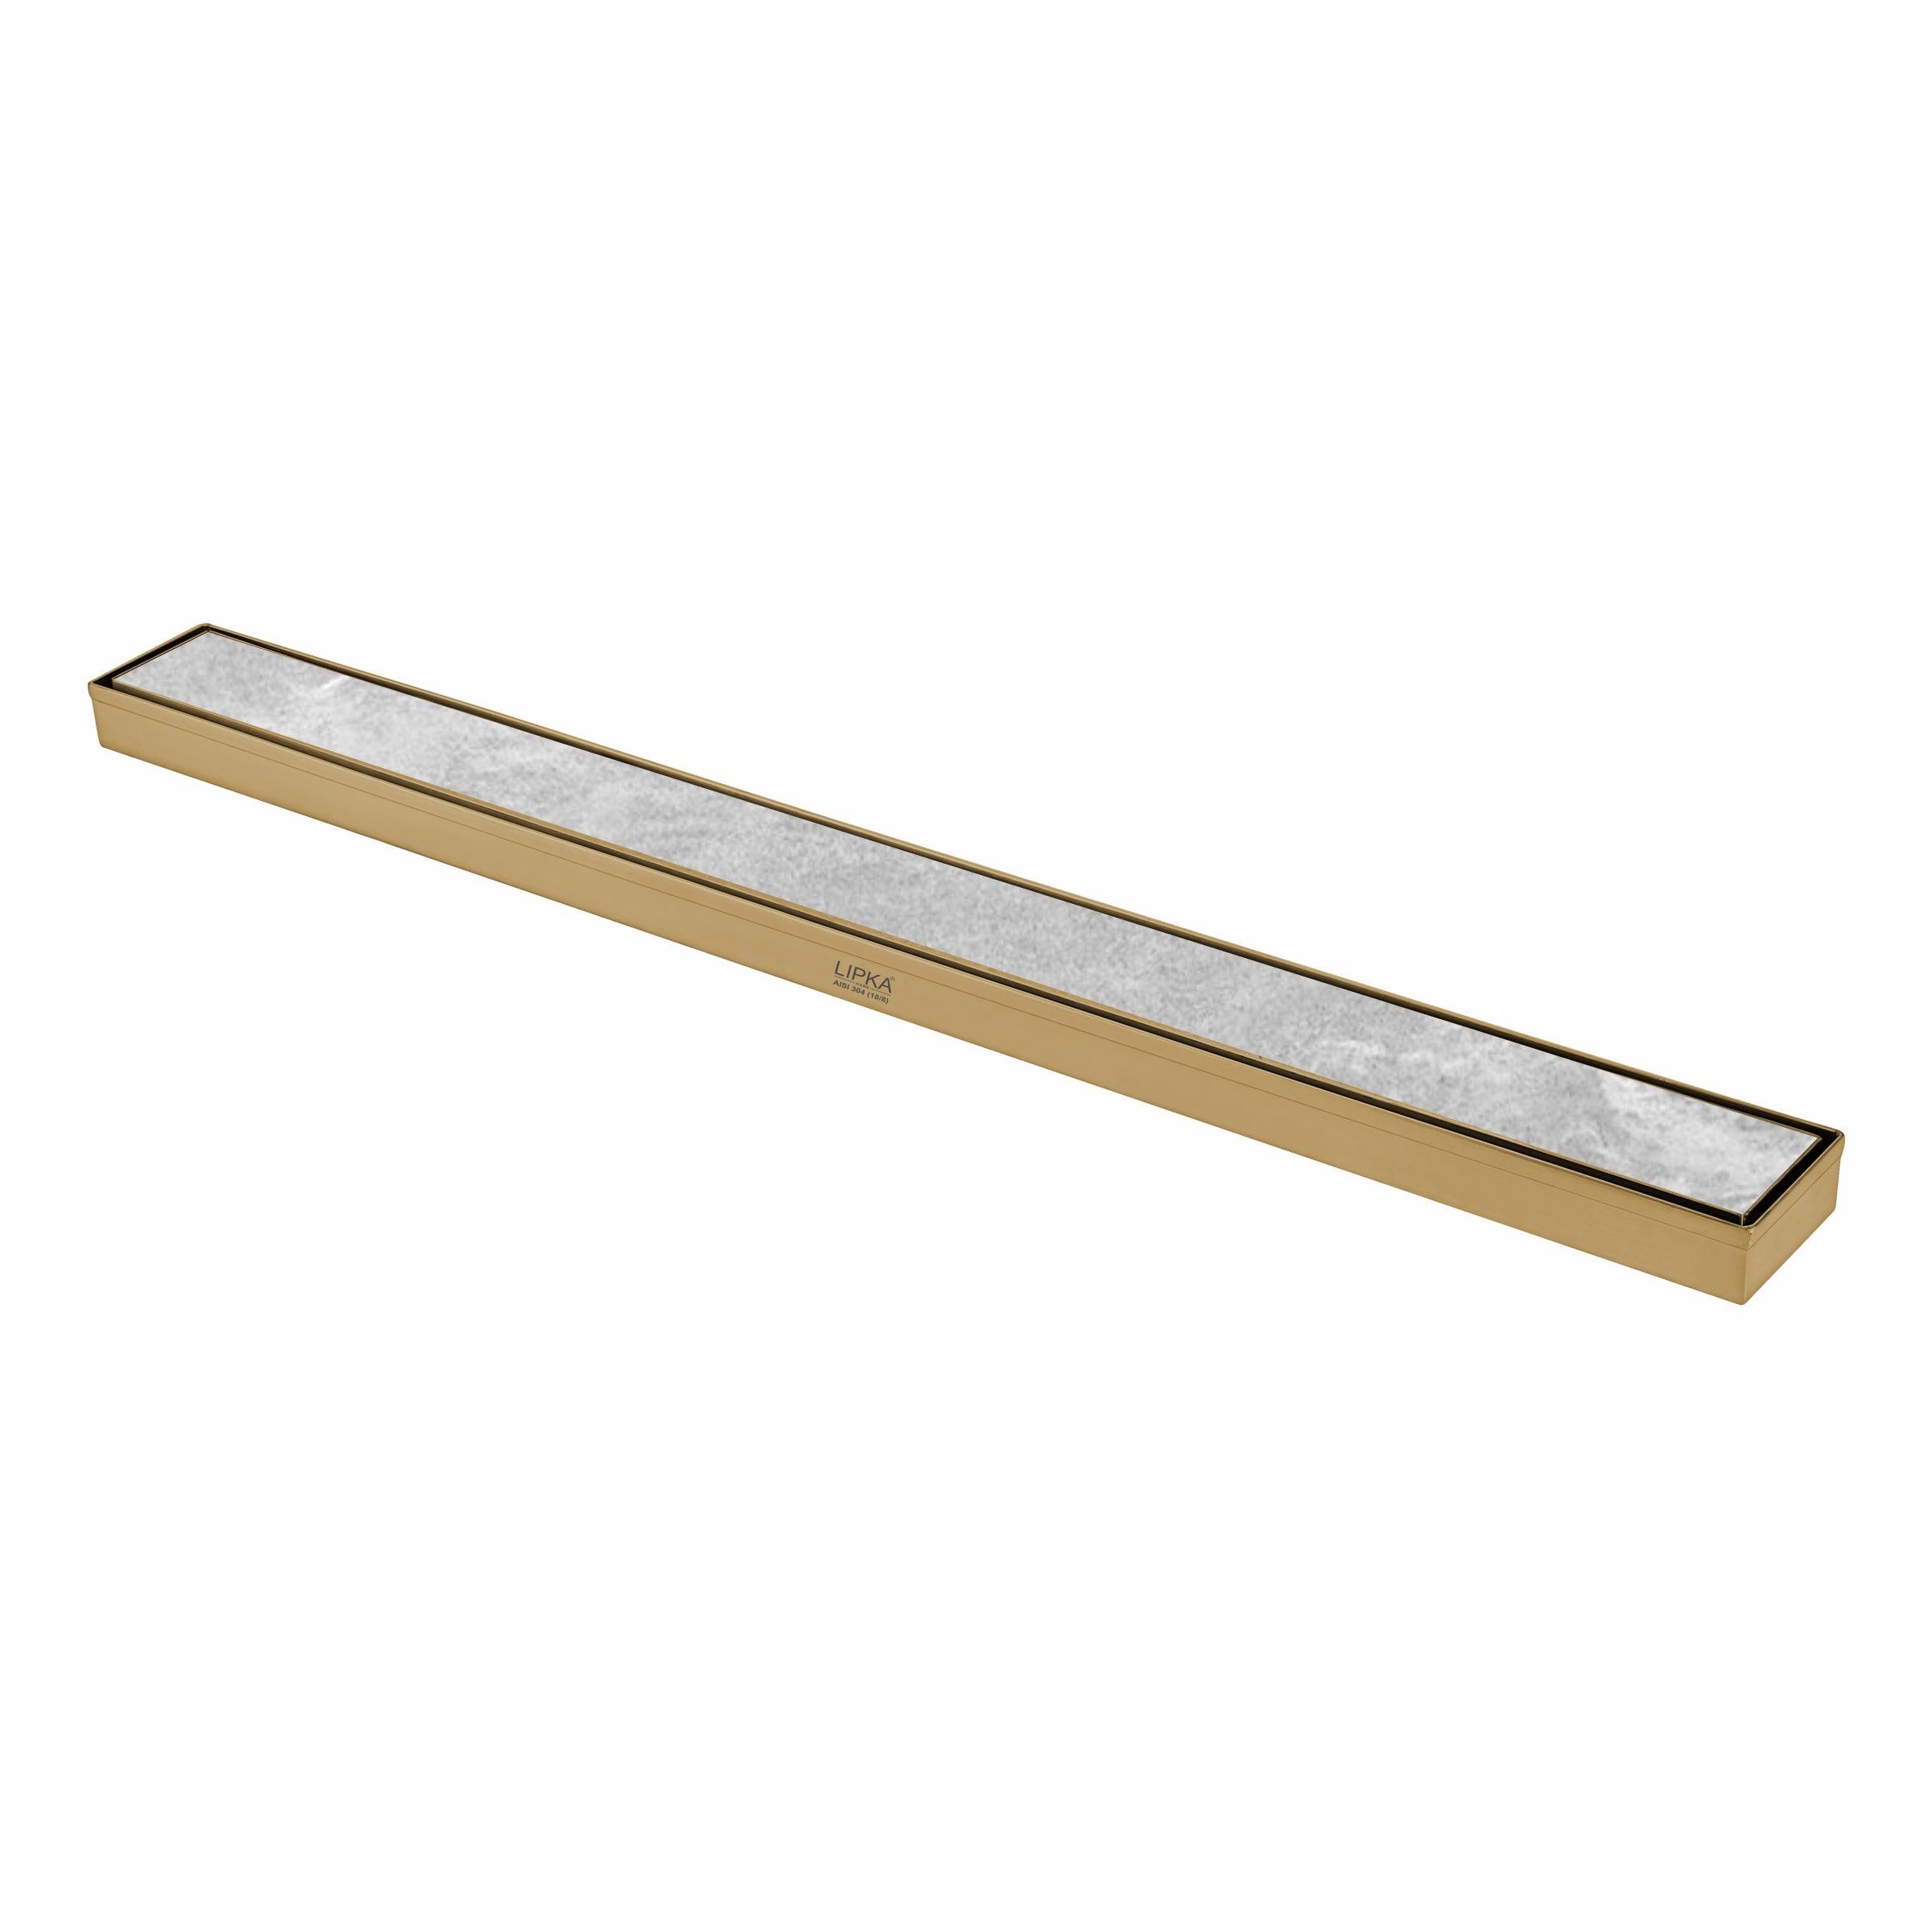 Marble Insert Shower Drain Channel - Yellow Gold (40 x 2 Inches)